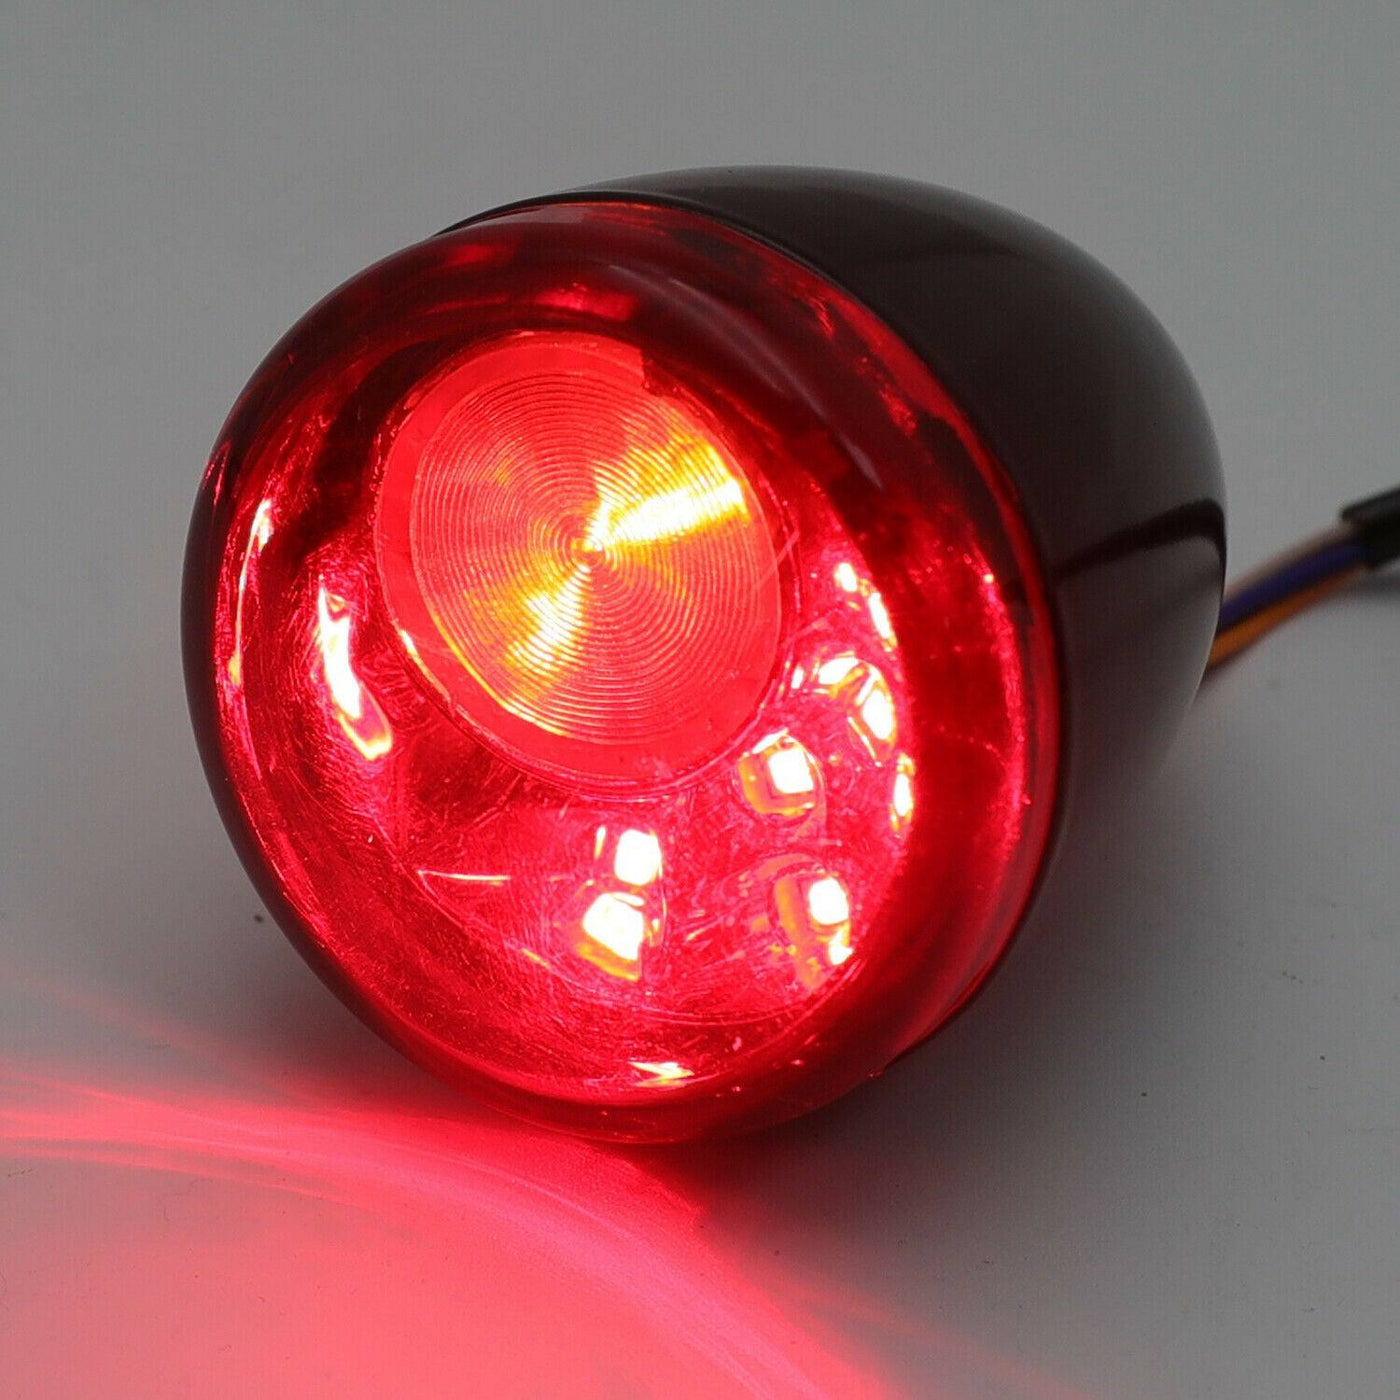 Red Rear LED Run Brake Turn Signal Indicator Light For Harley XL 883 1200 92-17 - Moto Life Products